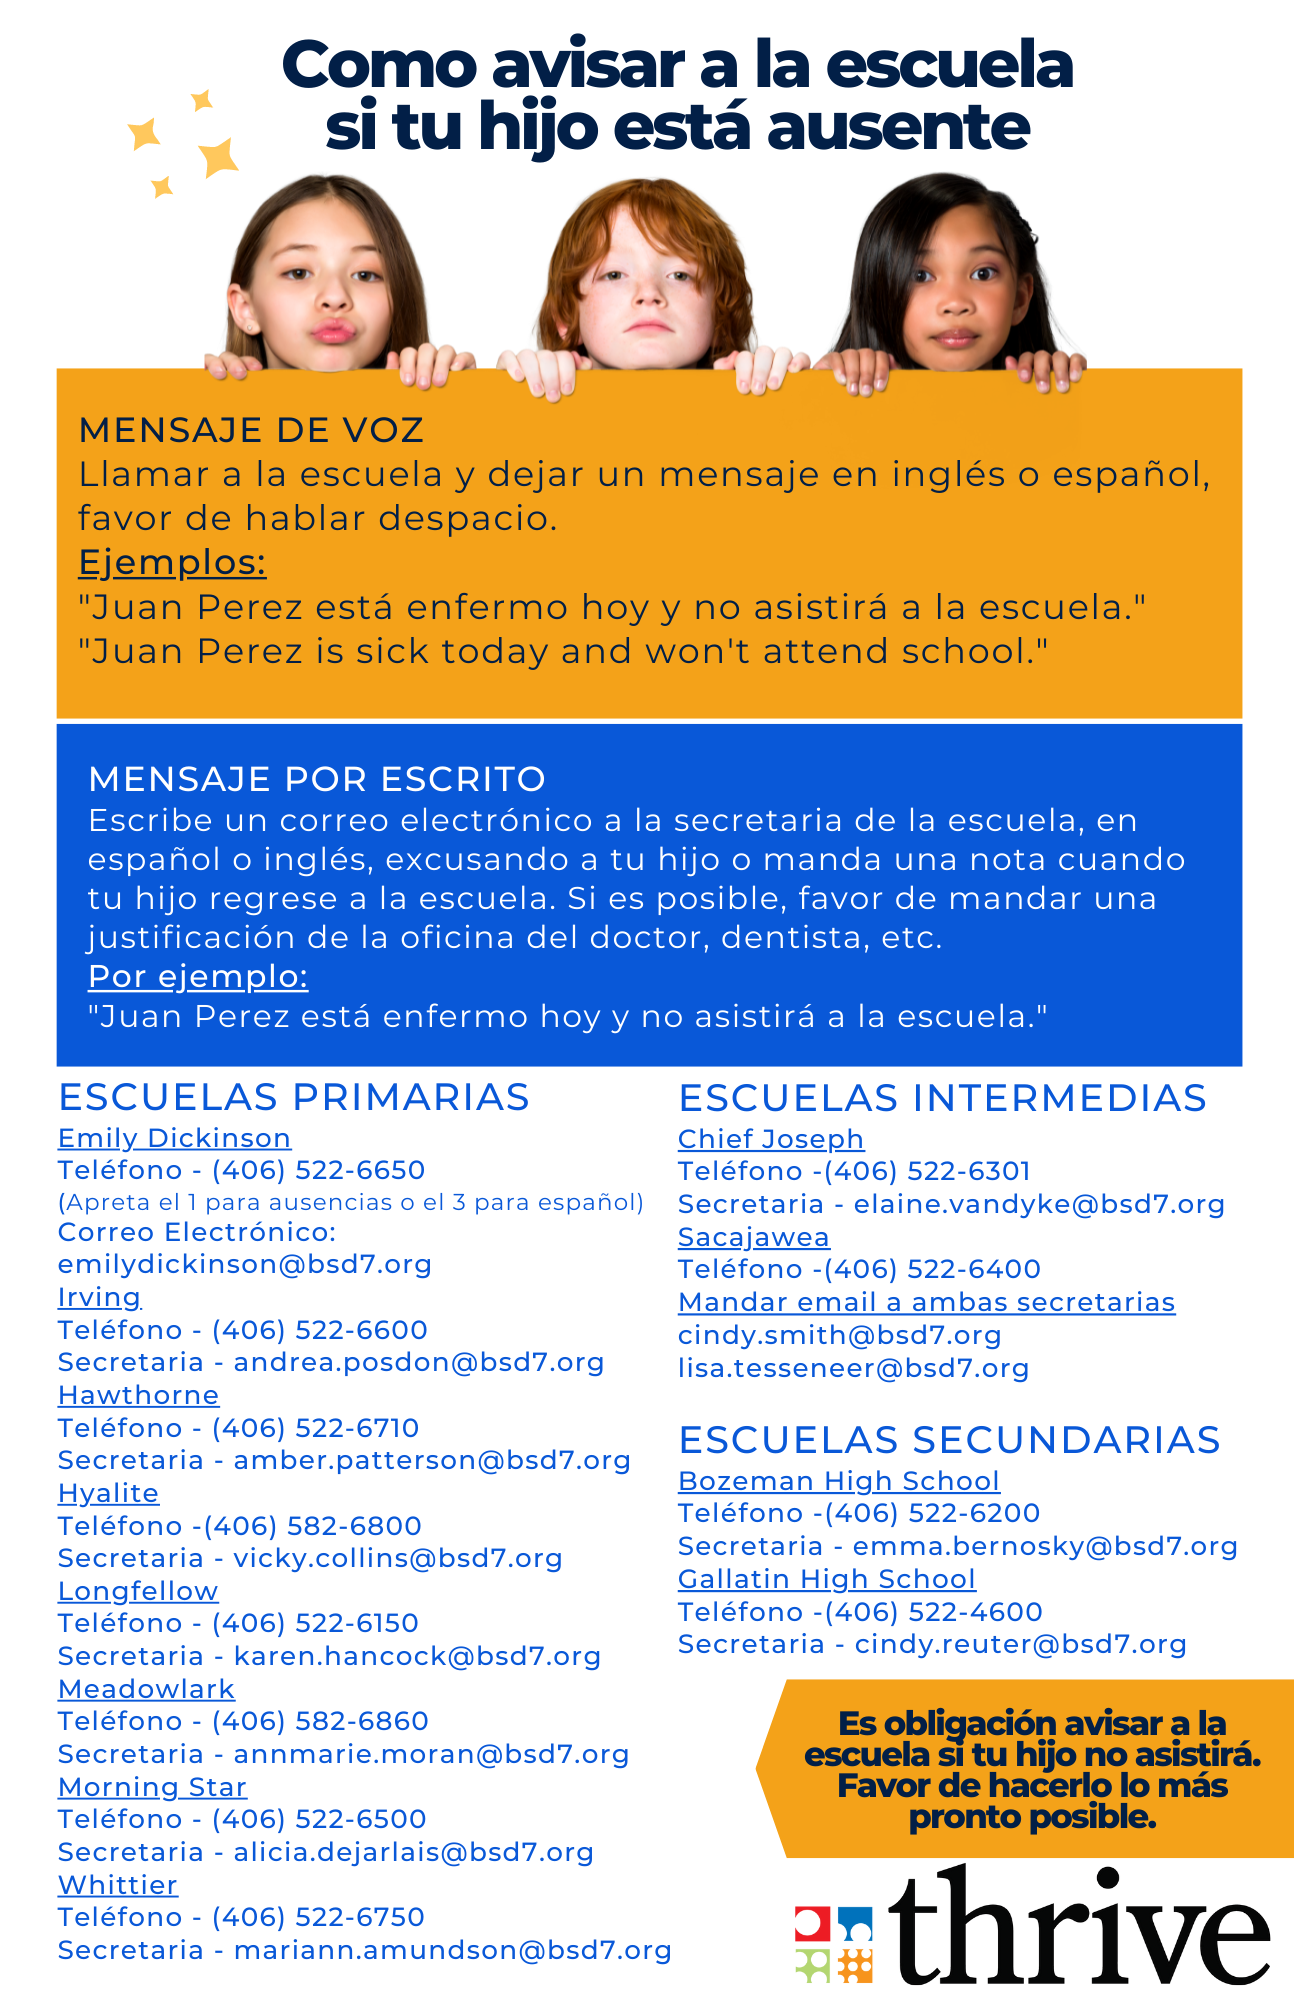 Infographic in Spanish describing how to inform the school if your child is absent